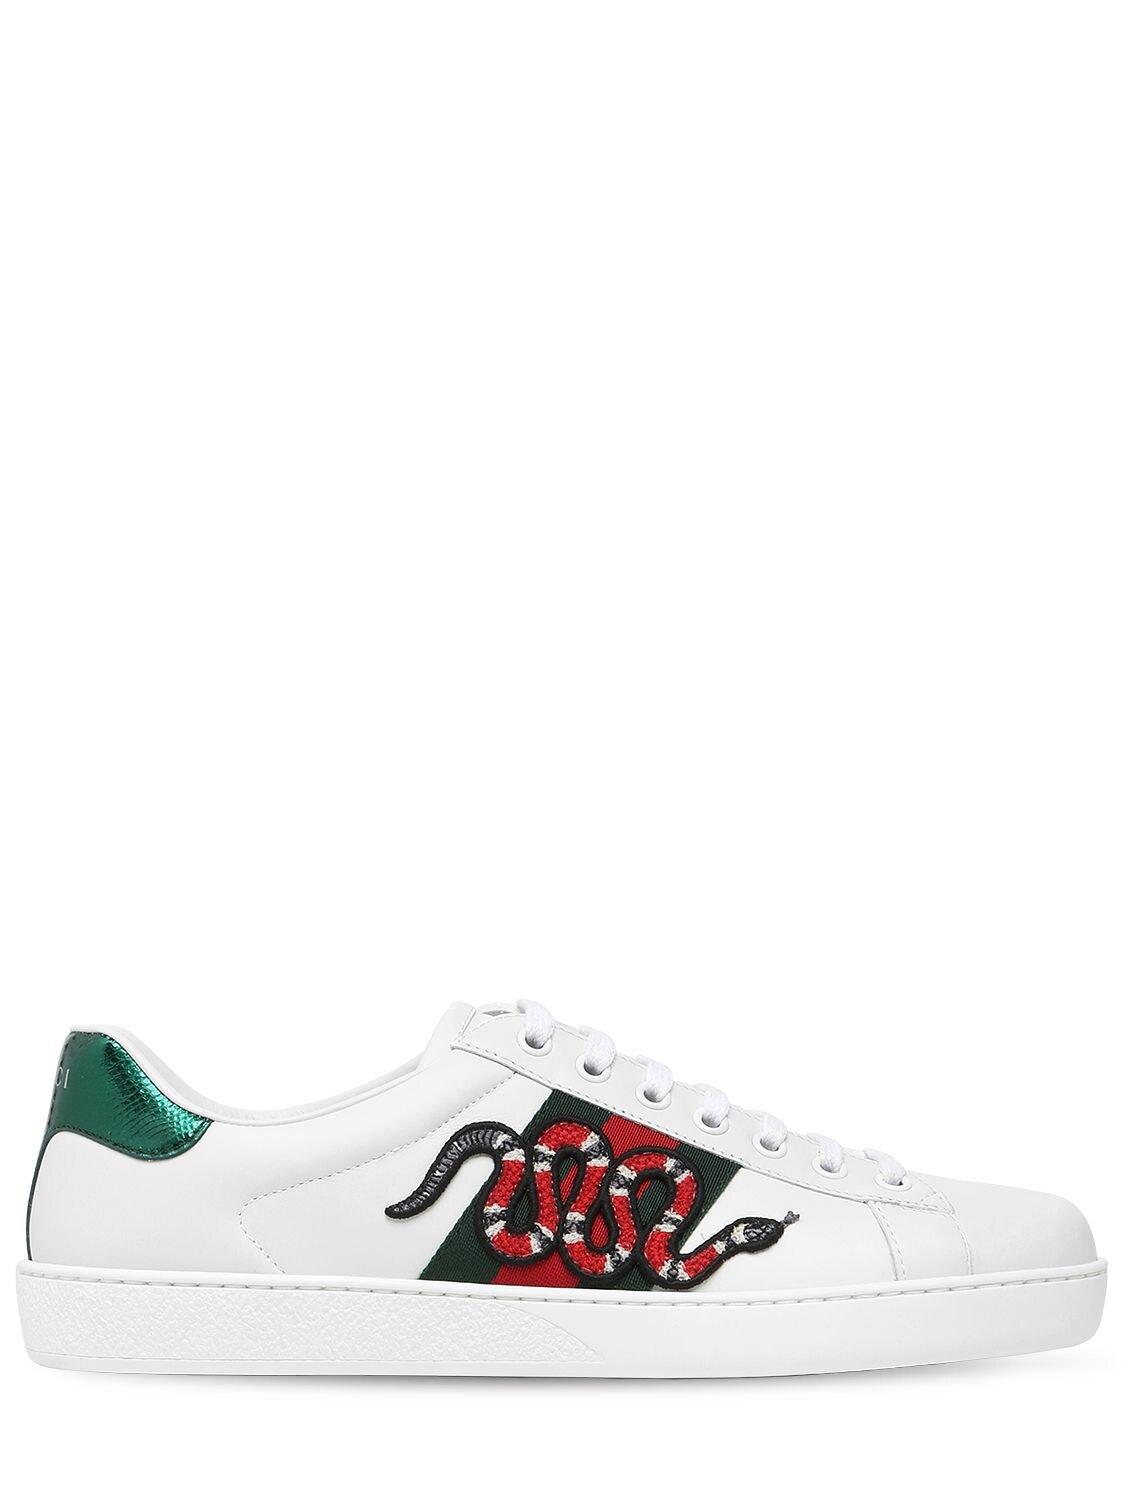 Gucci Leather Sneaker in for Men - Save 45% - Lyst